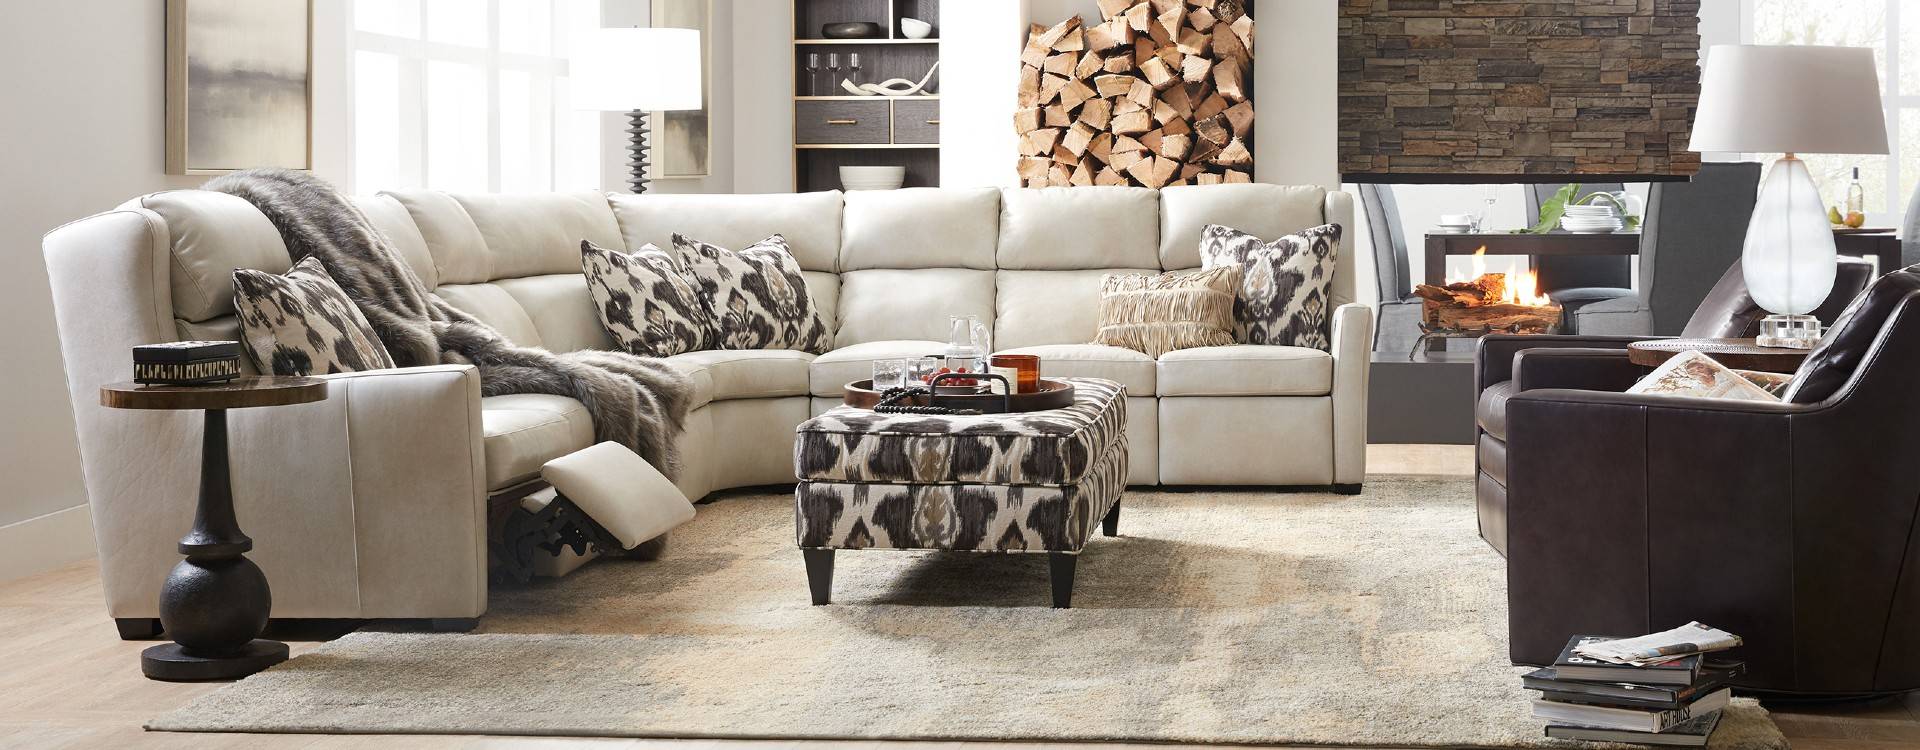 Find unique Calgary sofa Recliners & loveseats at modern furniture store in Calgary